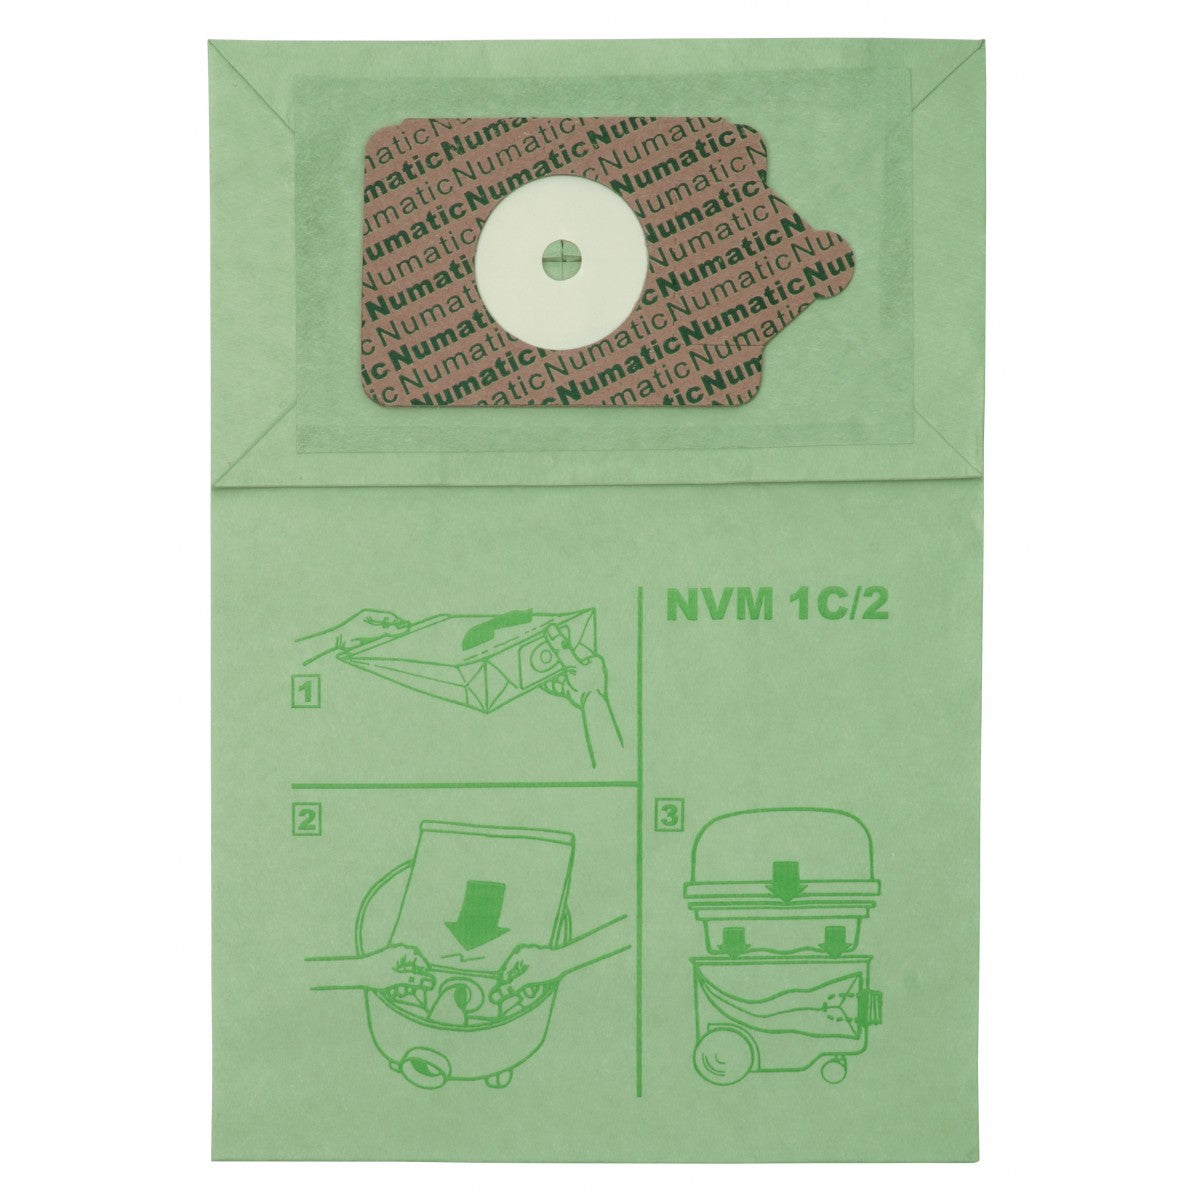 Paper Bag for Vacuum Johnny Vac JV200 and Numatic Henry NVM1C 200, 225, 250 - Pack of 10 Bags